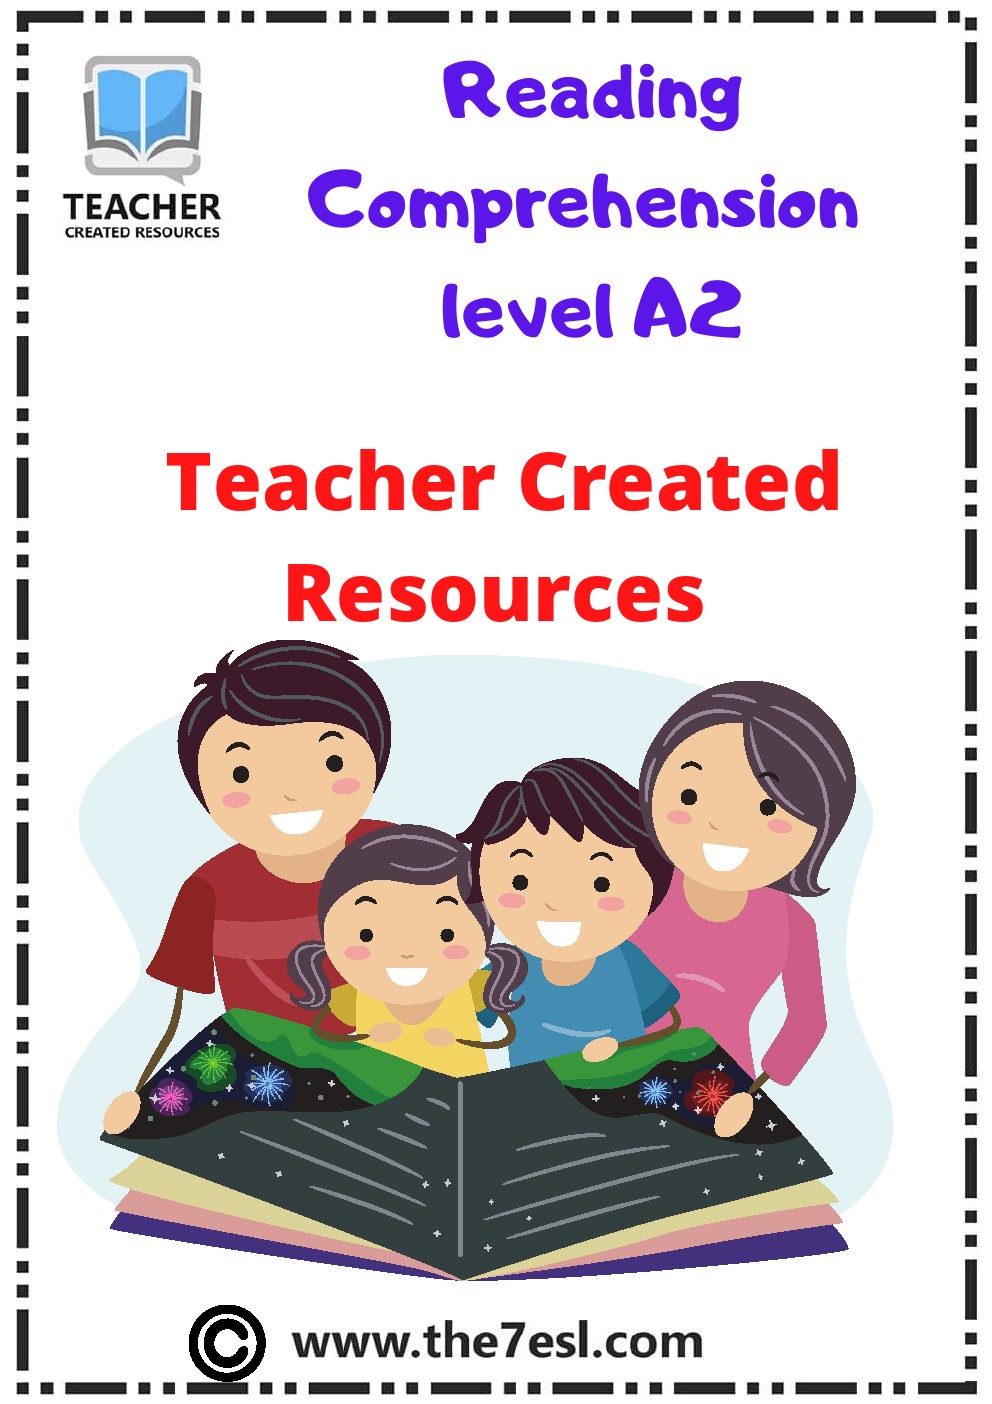 Reading Comprehension Level A2 reading comprehension level a2 pdf reading comprehension level a2 reading comprehension level a2-b1 reading comprehension a2 level british council reading comprehension a2 level english reading passages a2 level reading comprehension worksheets level a2 esl